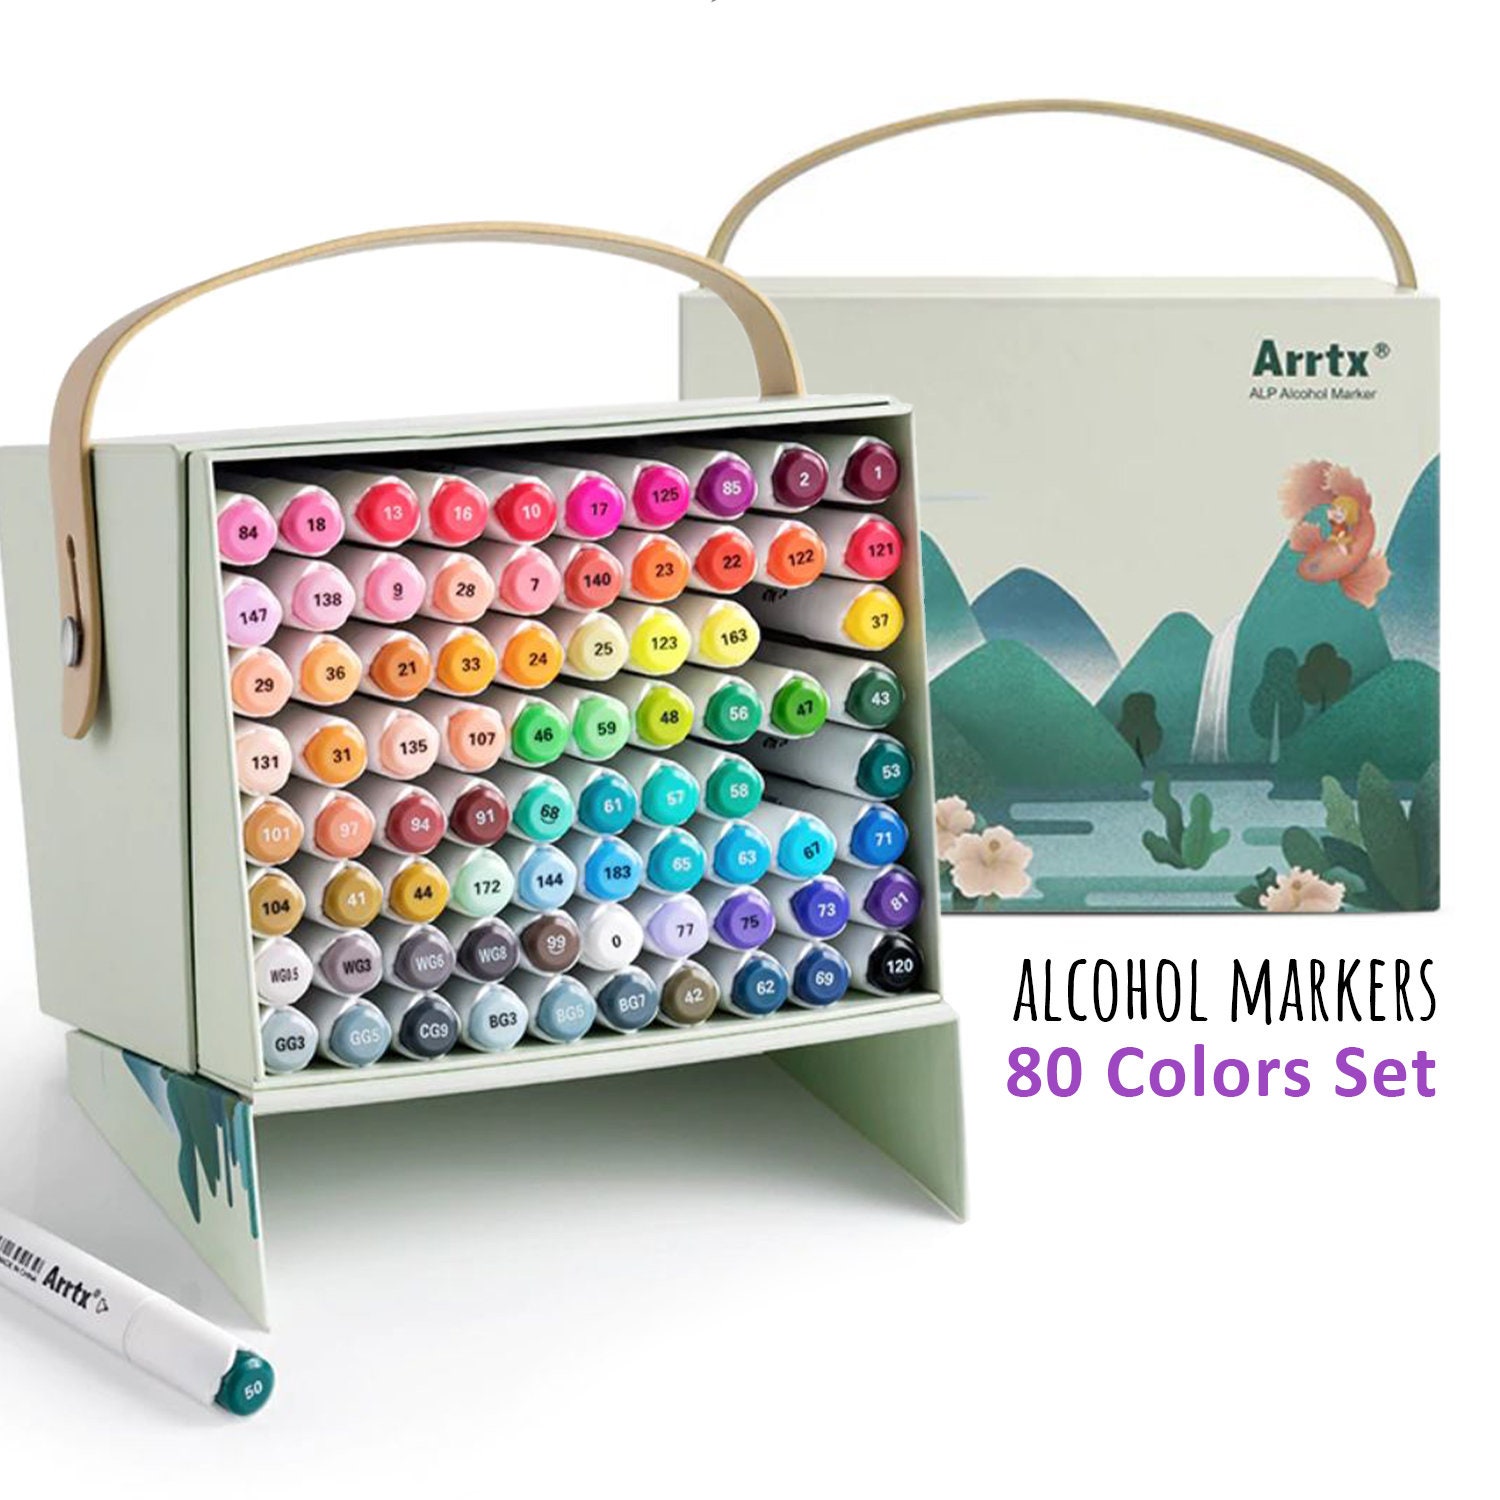 Alcohol Markers 80 Vibrant Colors Alcohol Marker Pen Set Dual Tips Markers  Painting Coloring 